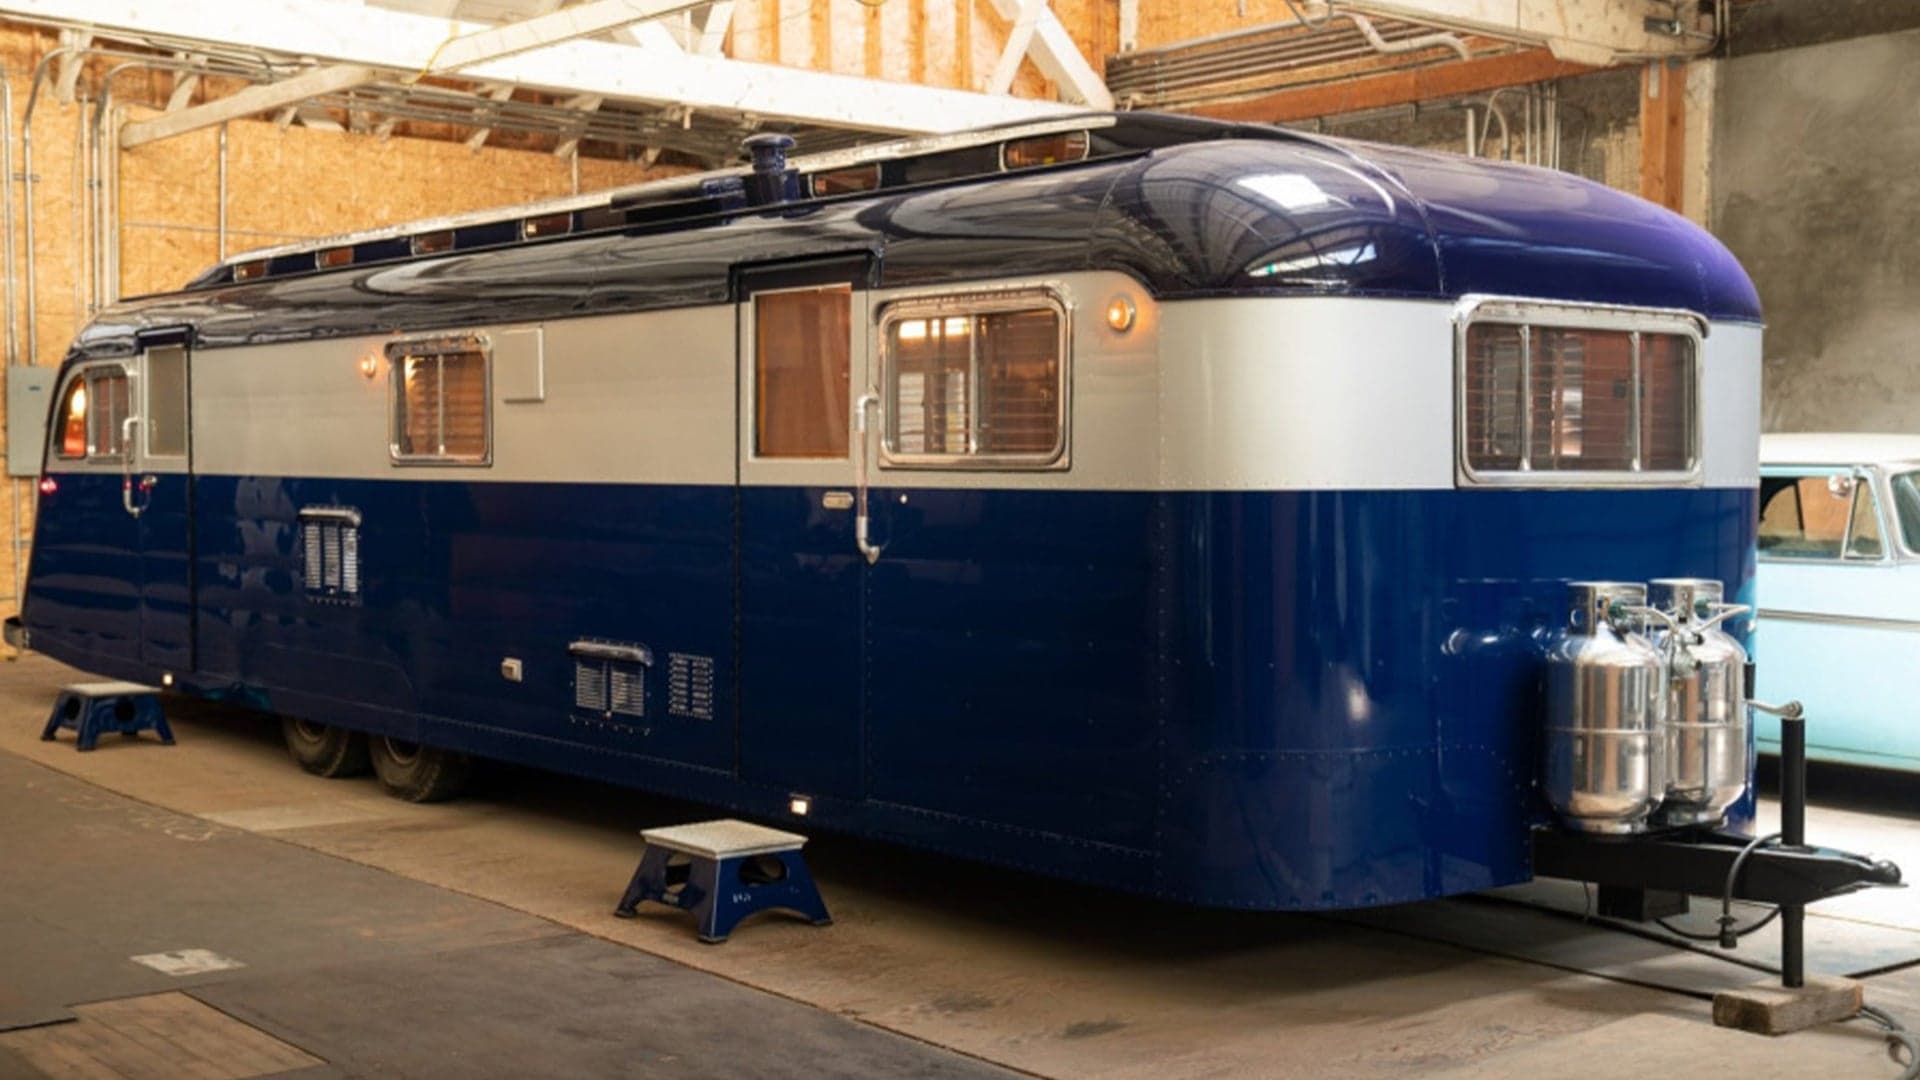 Incredible 1950 Westcraft Camper Trailer Puts Your Airstream to Shame